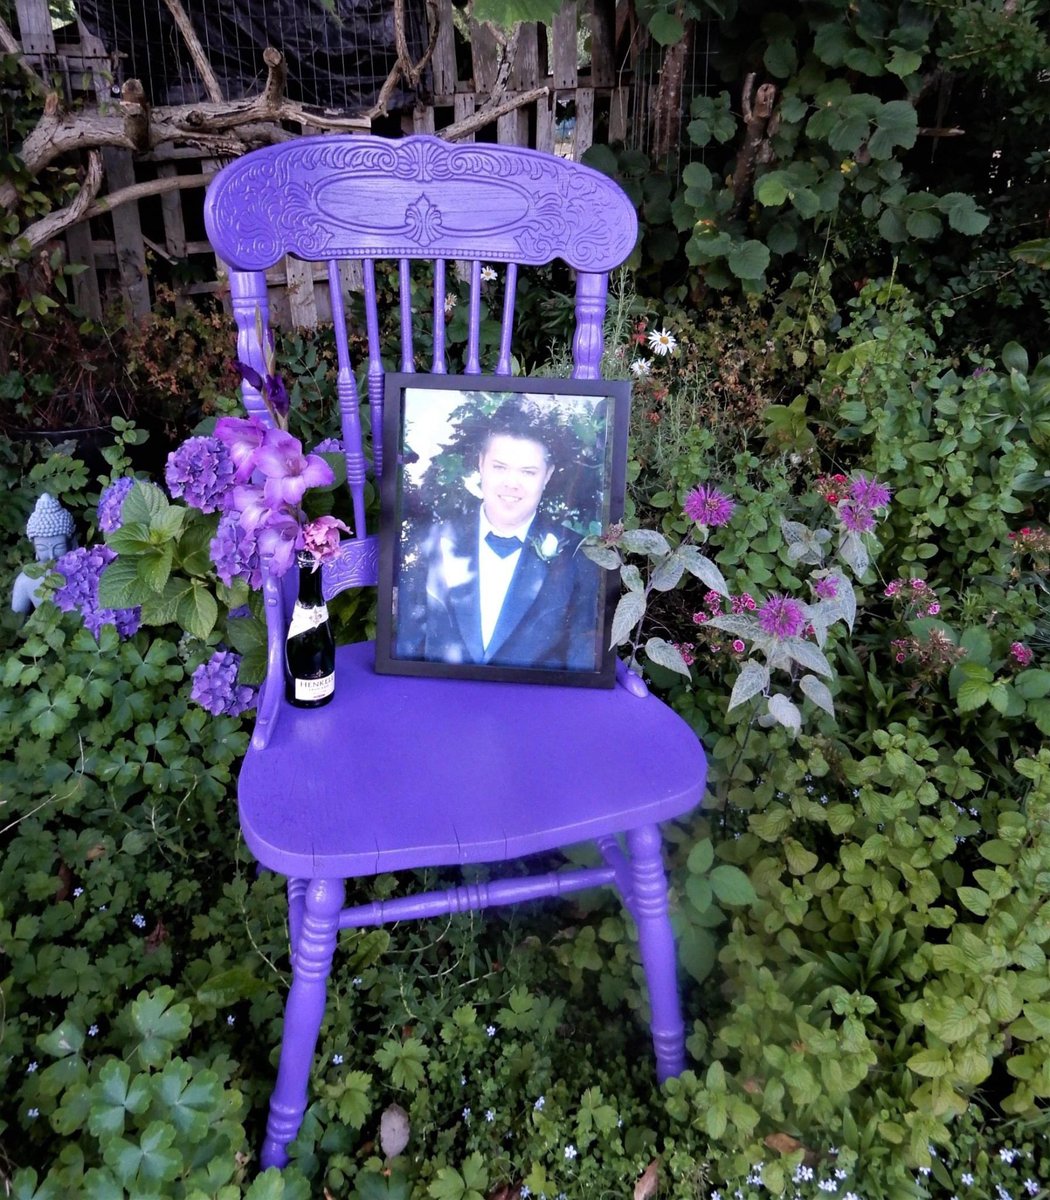 August represents Overdose Awareness for families who have lost loved ones to the #toxicdrugsupply

In memory of Sean Robert Treloar
Dec 15/88 - May 6/16..Forever loved, Forever Missed 💔 your mom Darlana

#purplechaircampaign
#SafeSupplyNow
#deadpeoplecantrecover
#seanmattered